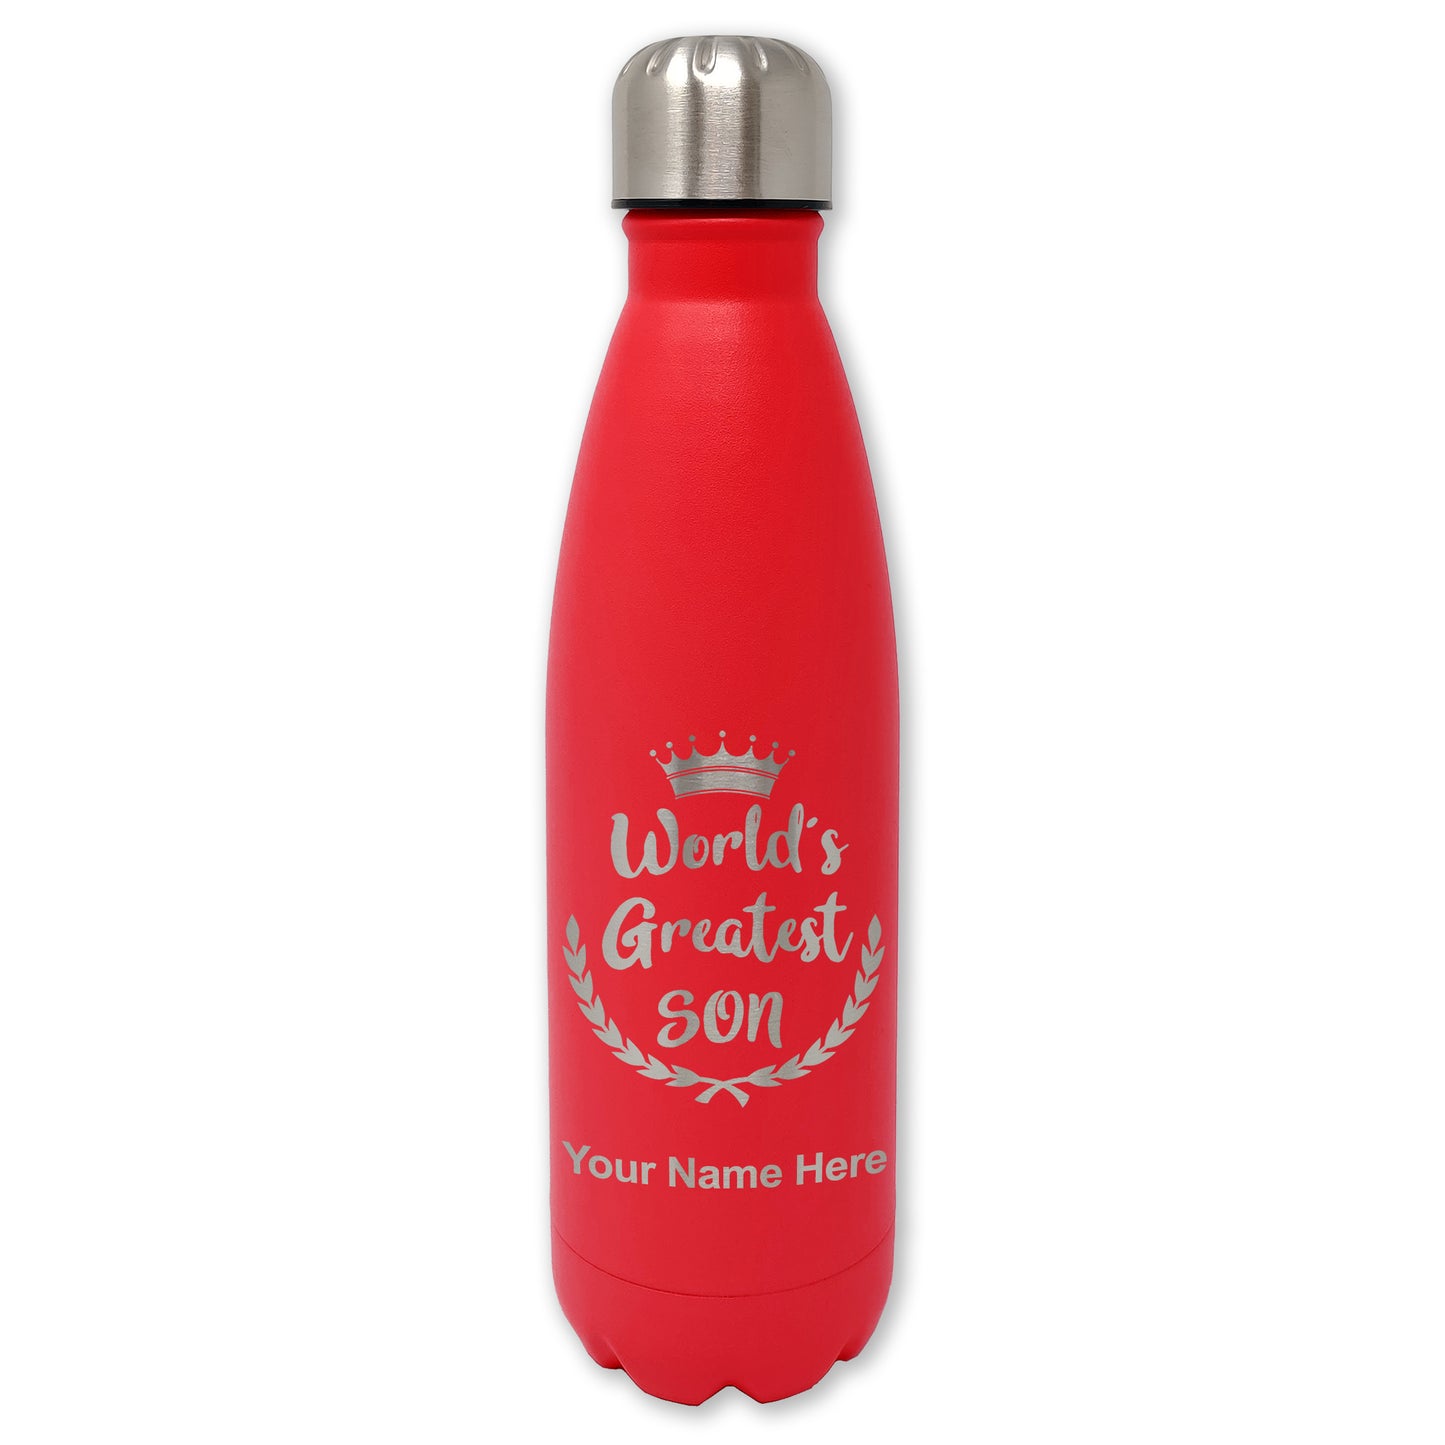 LaserGram Double Wall Water Bottle, World's Greatest Son, Personalized Engraving Included